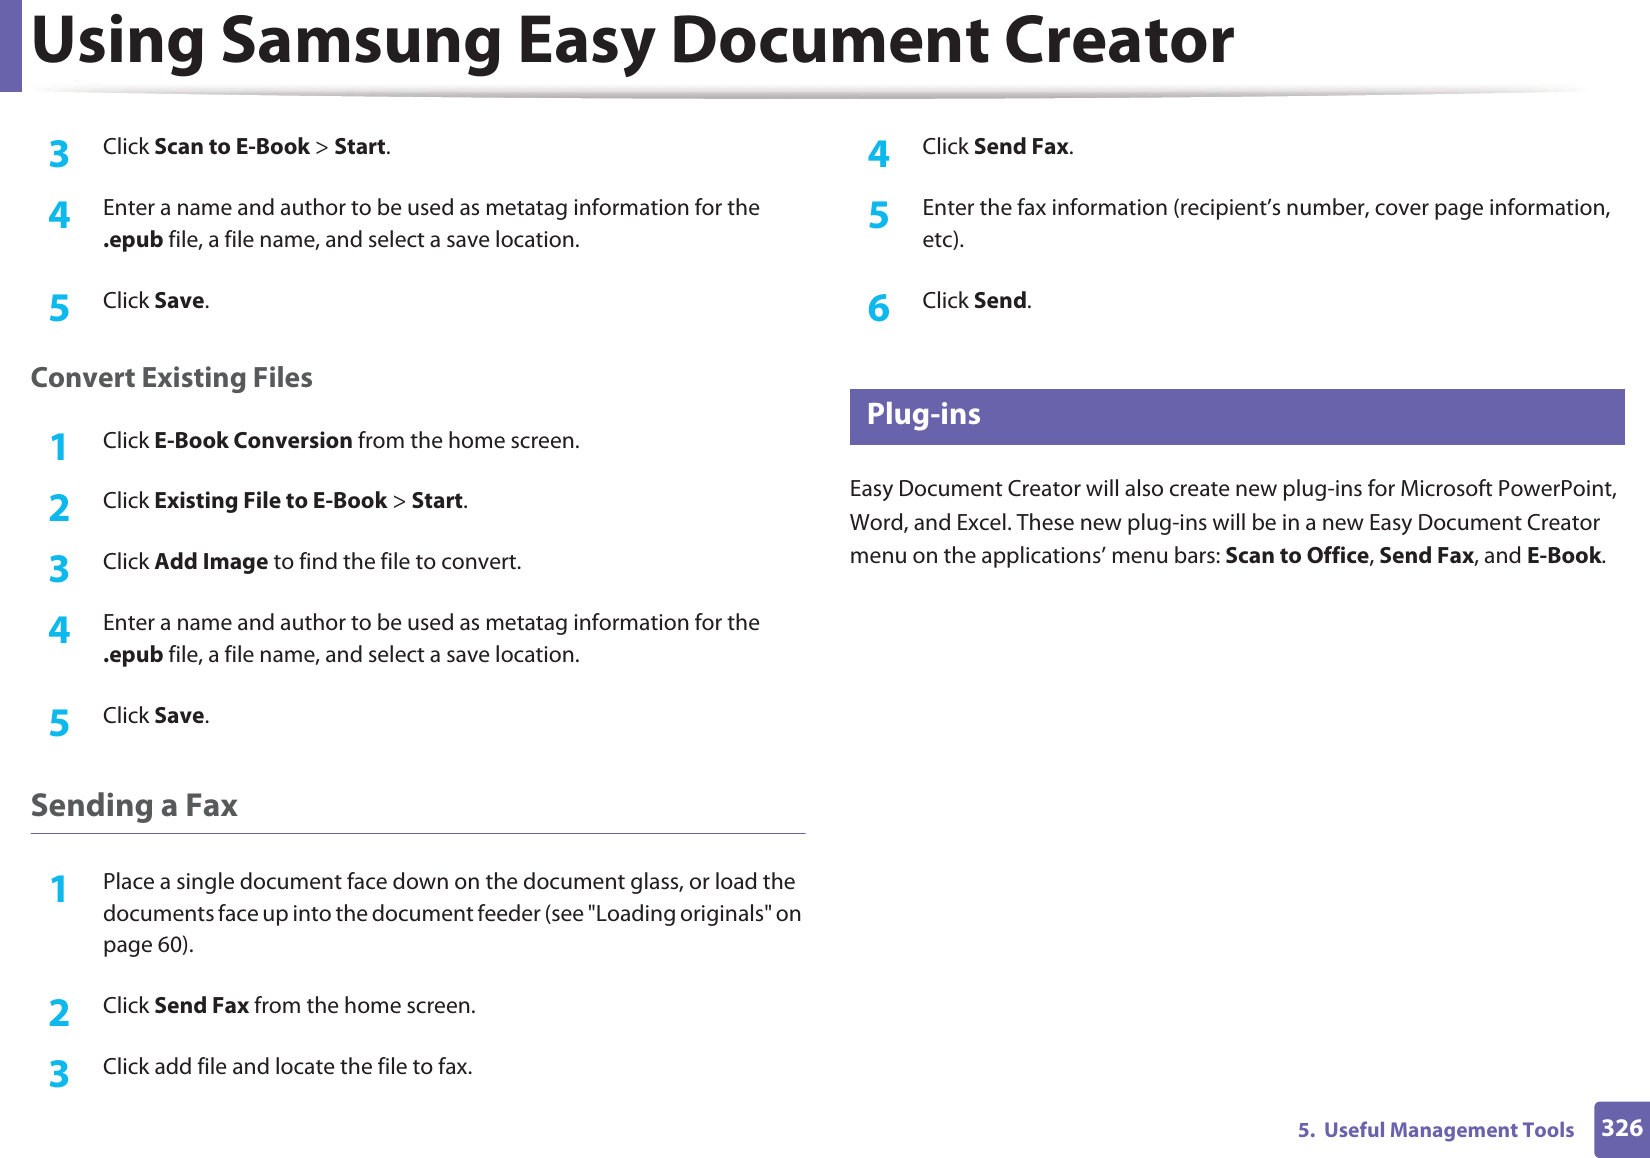 Using Samsung Easy Document Creator3265.  Useful Management Tools3  Click Scan to E-Book &gt; Start.4  Enter a name and author to be used as metatag information for the .epub file, a file name, and select a save location.5  Click Save.Convert Existing Files1Click E-Book Conversion from the home screen.2  Click Existing File to E-Book &gt; Start.3  Click Add Image to find the file to convert.4  Enter a name and author to be used as metatag information for the .epub file, a file name, and select a save location.5  Click Save.Sending a Fax1Place a single document face down on the document glass, or load the documents face up into the document feeder (see &quot;Loading originals&quot; on page 60).2  Click Send Fax from the home screen.3  Click add file and locate the file to fax.4  Click Send Fax.5  Enter the fax information (recipient’s number, cover page information, etc).6  Click Send.7 Plug-insEasy Document Creator will also create new plug-ins for Microsoft PowerPoint, Word, and Excel. These new plug-ins will be in a new Easy Document Creator menu on the applications’ menu bars: Scan to Office, Send Fax, and E-Book.